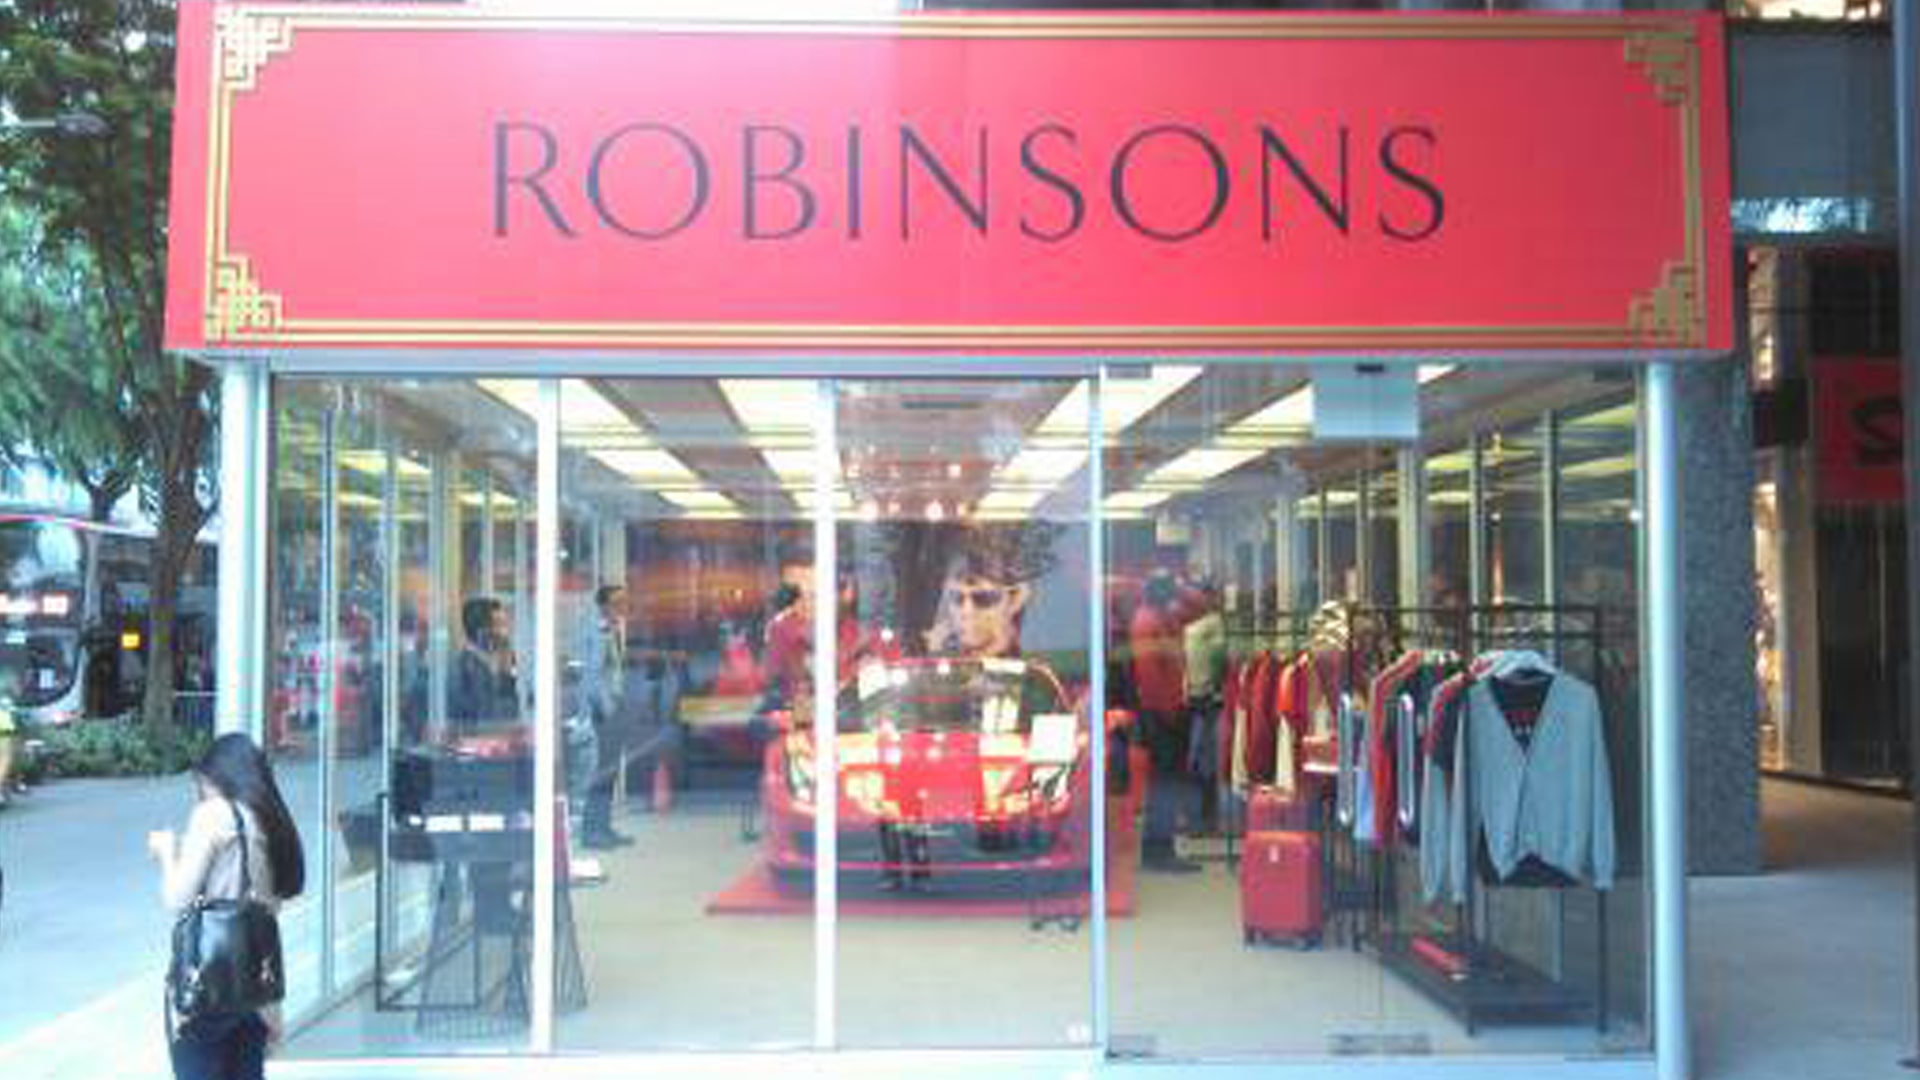 tsc_opt-images_tubelar-system_robinsons-pop-up-merchandise-store-1920x1080-03-min